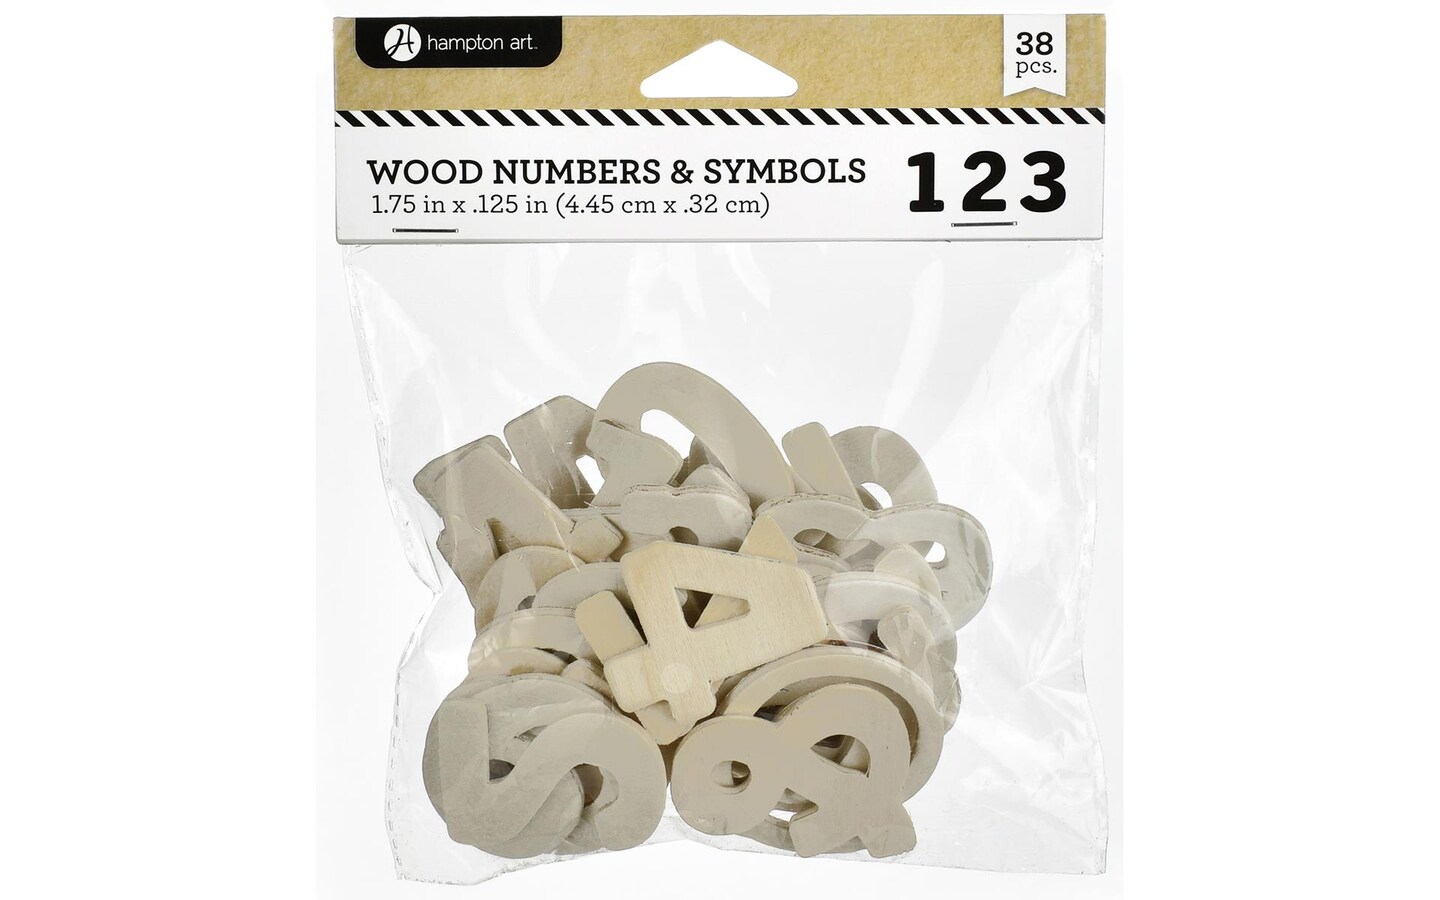 Hampton Art Wood Numbers 38 pack, each number is approximately 1.75 inches, unfinished for painting, decoupage, stenciling or embellishments, easy to customize